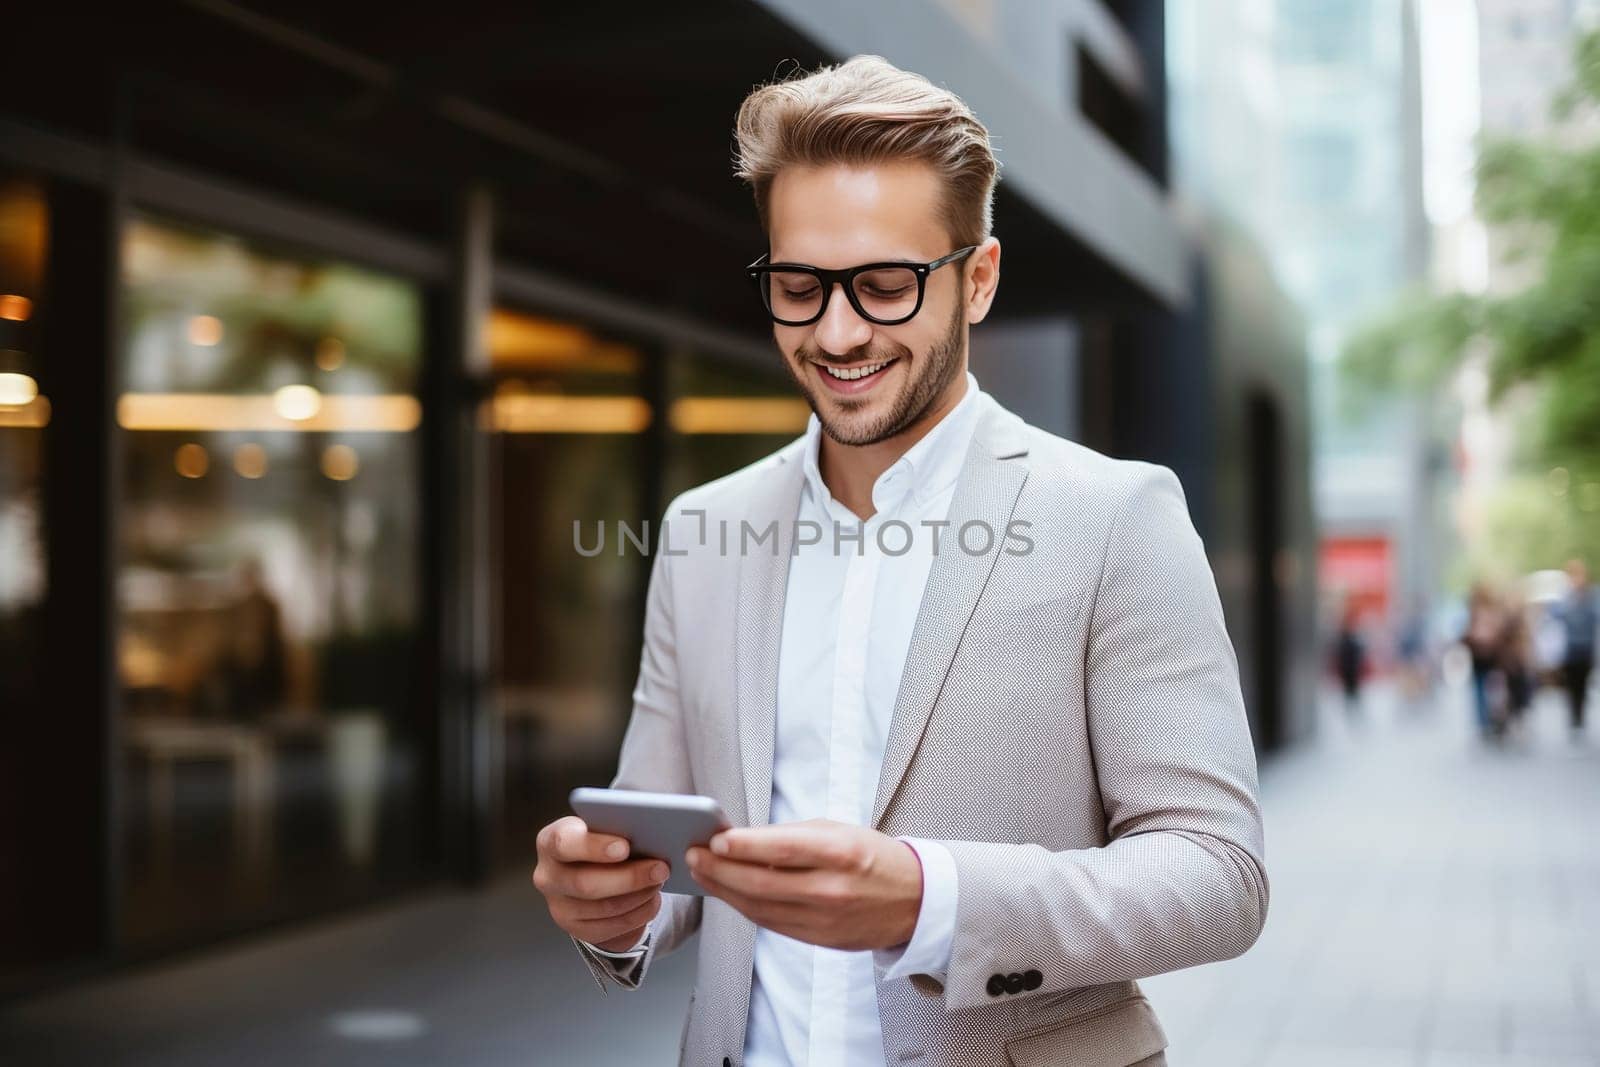 Smiling young man using smartphone in city. Casual style outdoor shoot. Modern urban lifestyle and technology concept for design and print